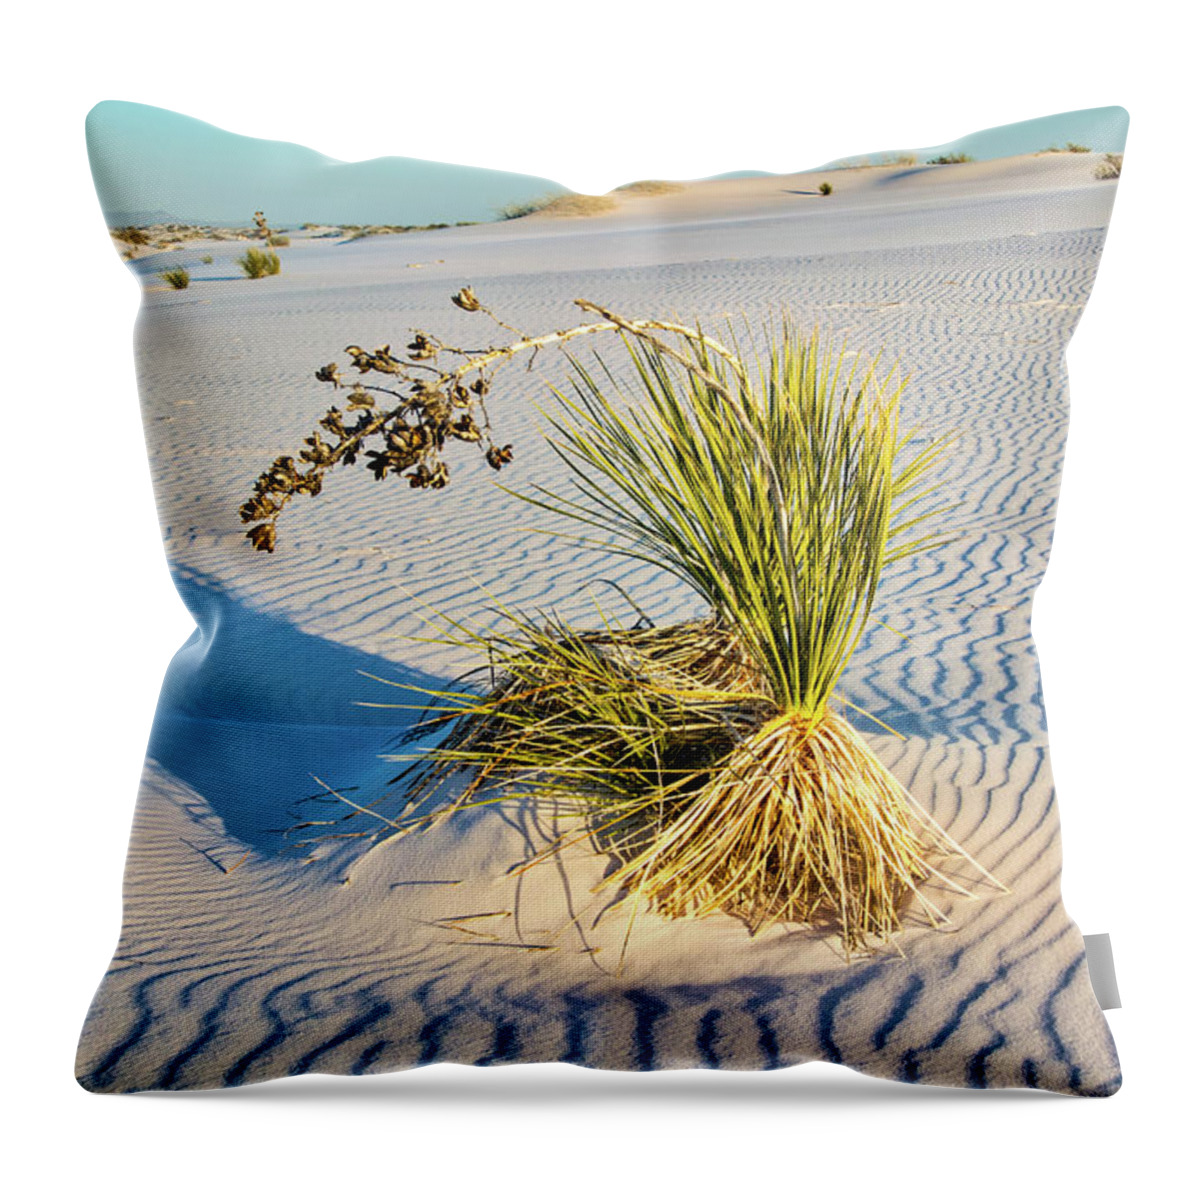 National Parks And Monuments Throw Pillow featuring the photograph White Sands National Monument, New Mexico by Segura Shaw Photography